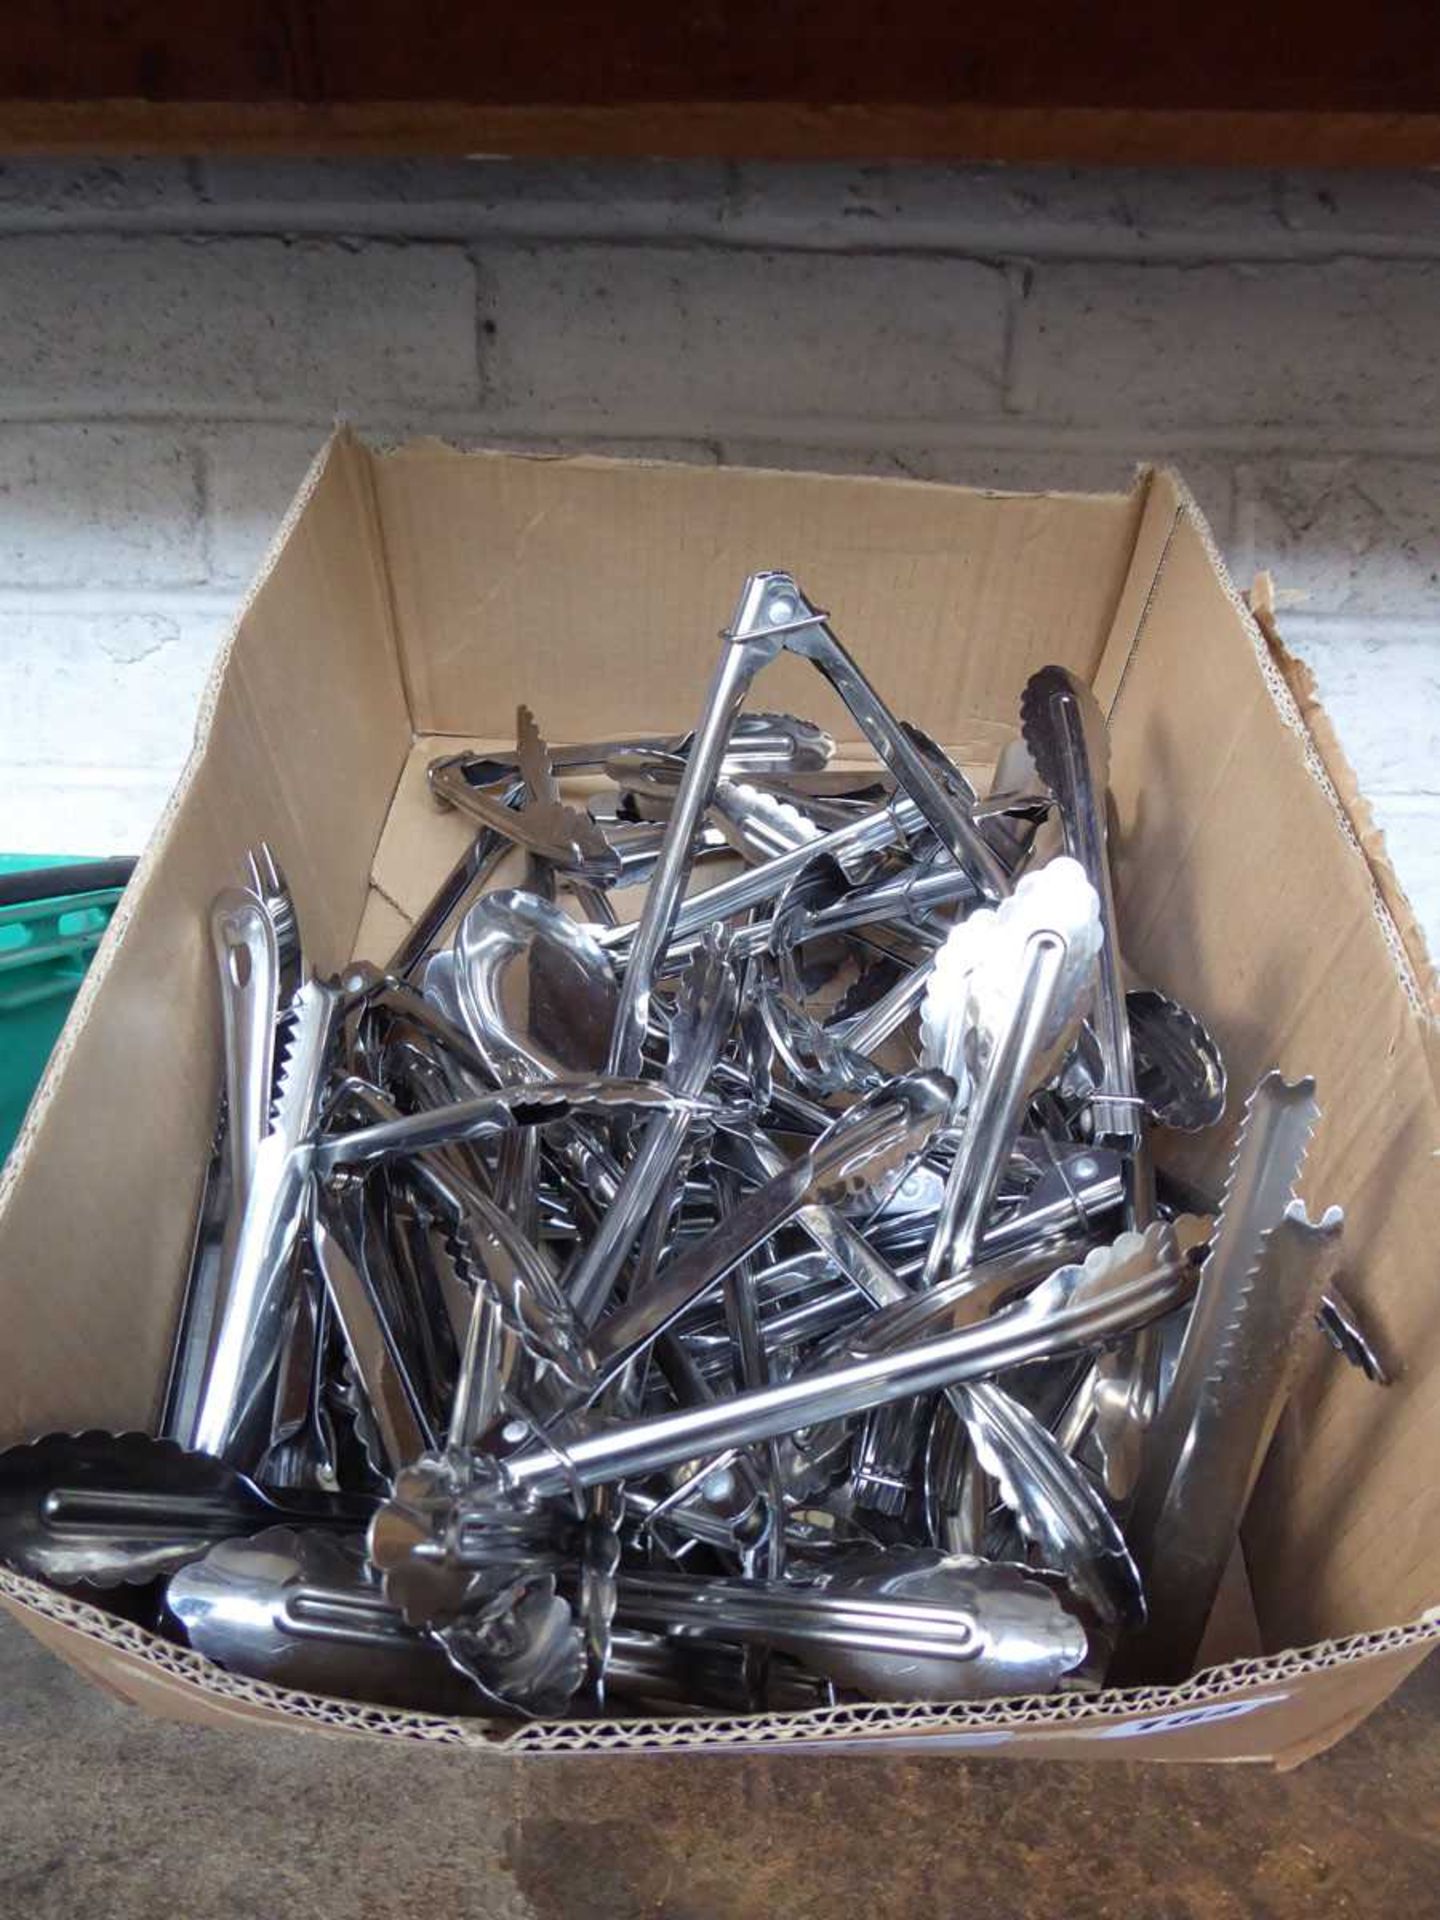 Box containing mostly stainless steel serving tongs